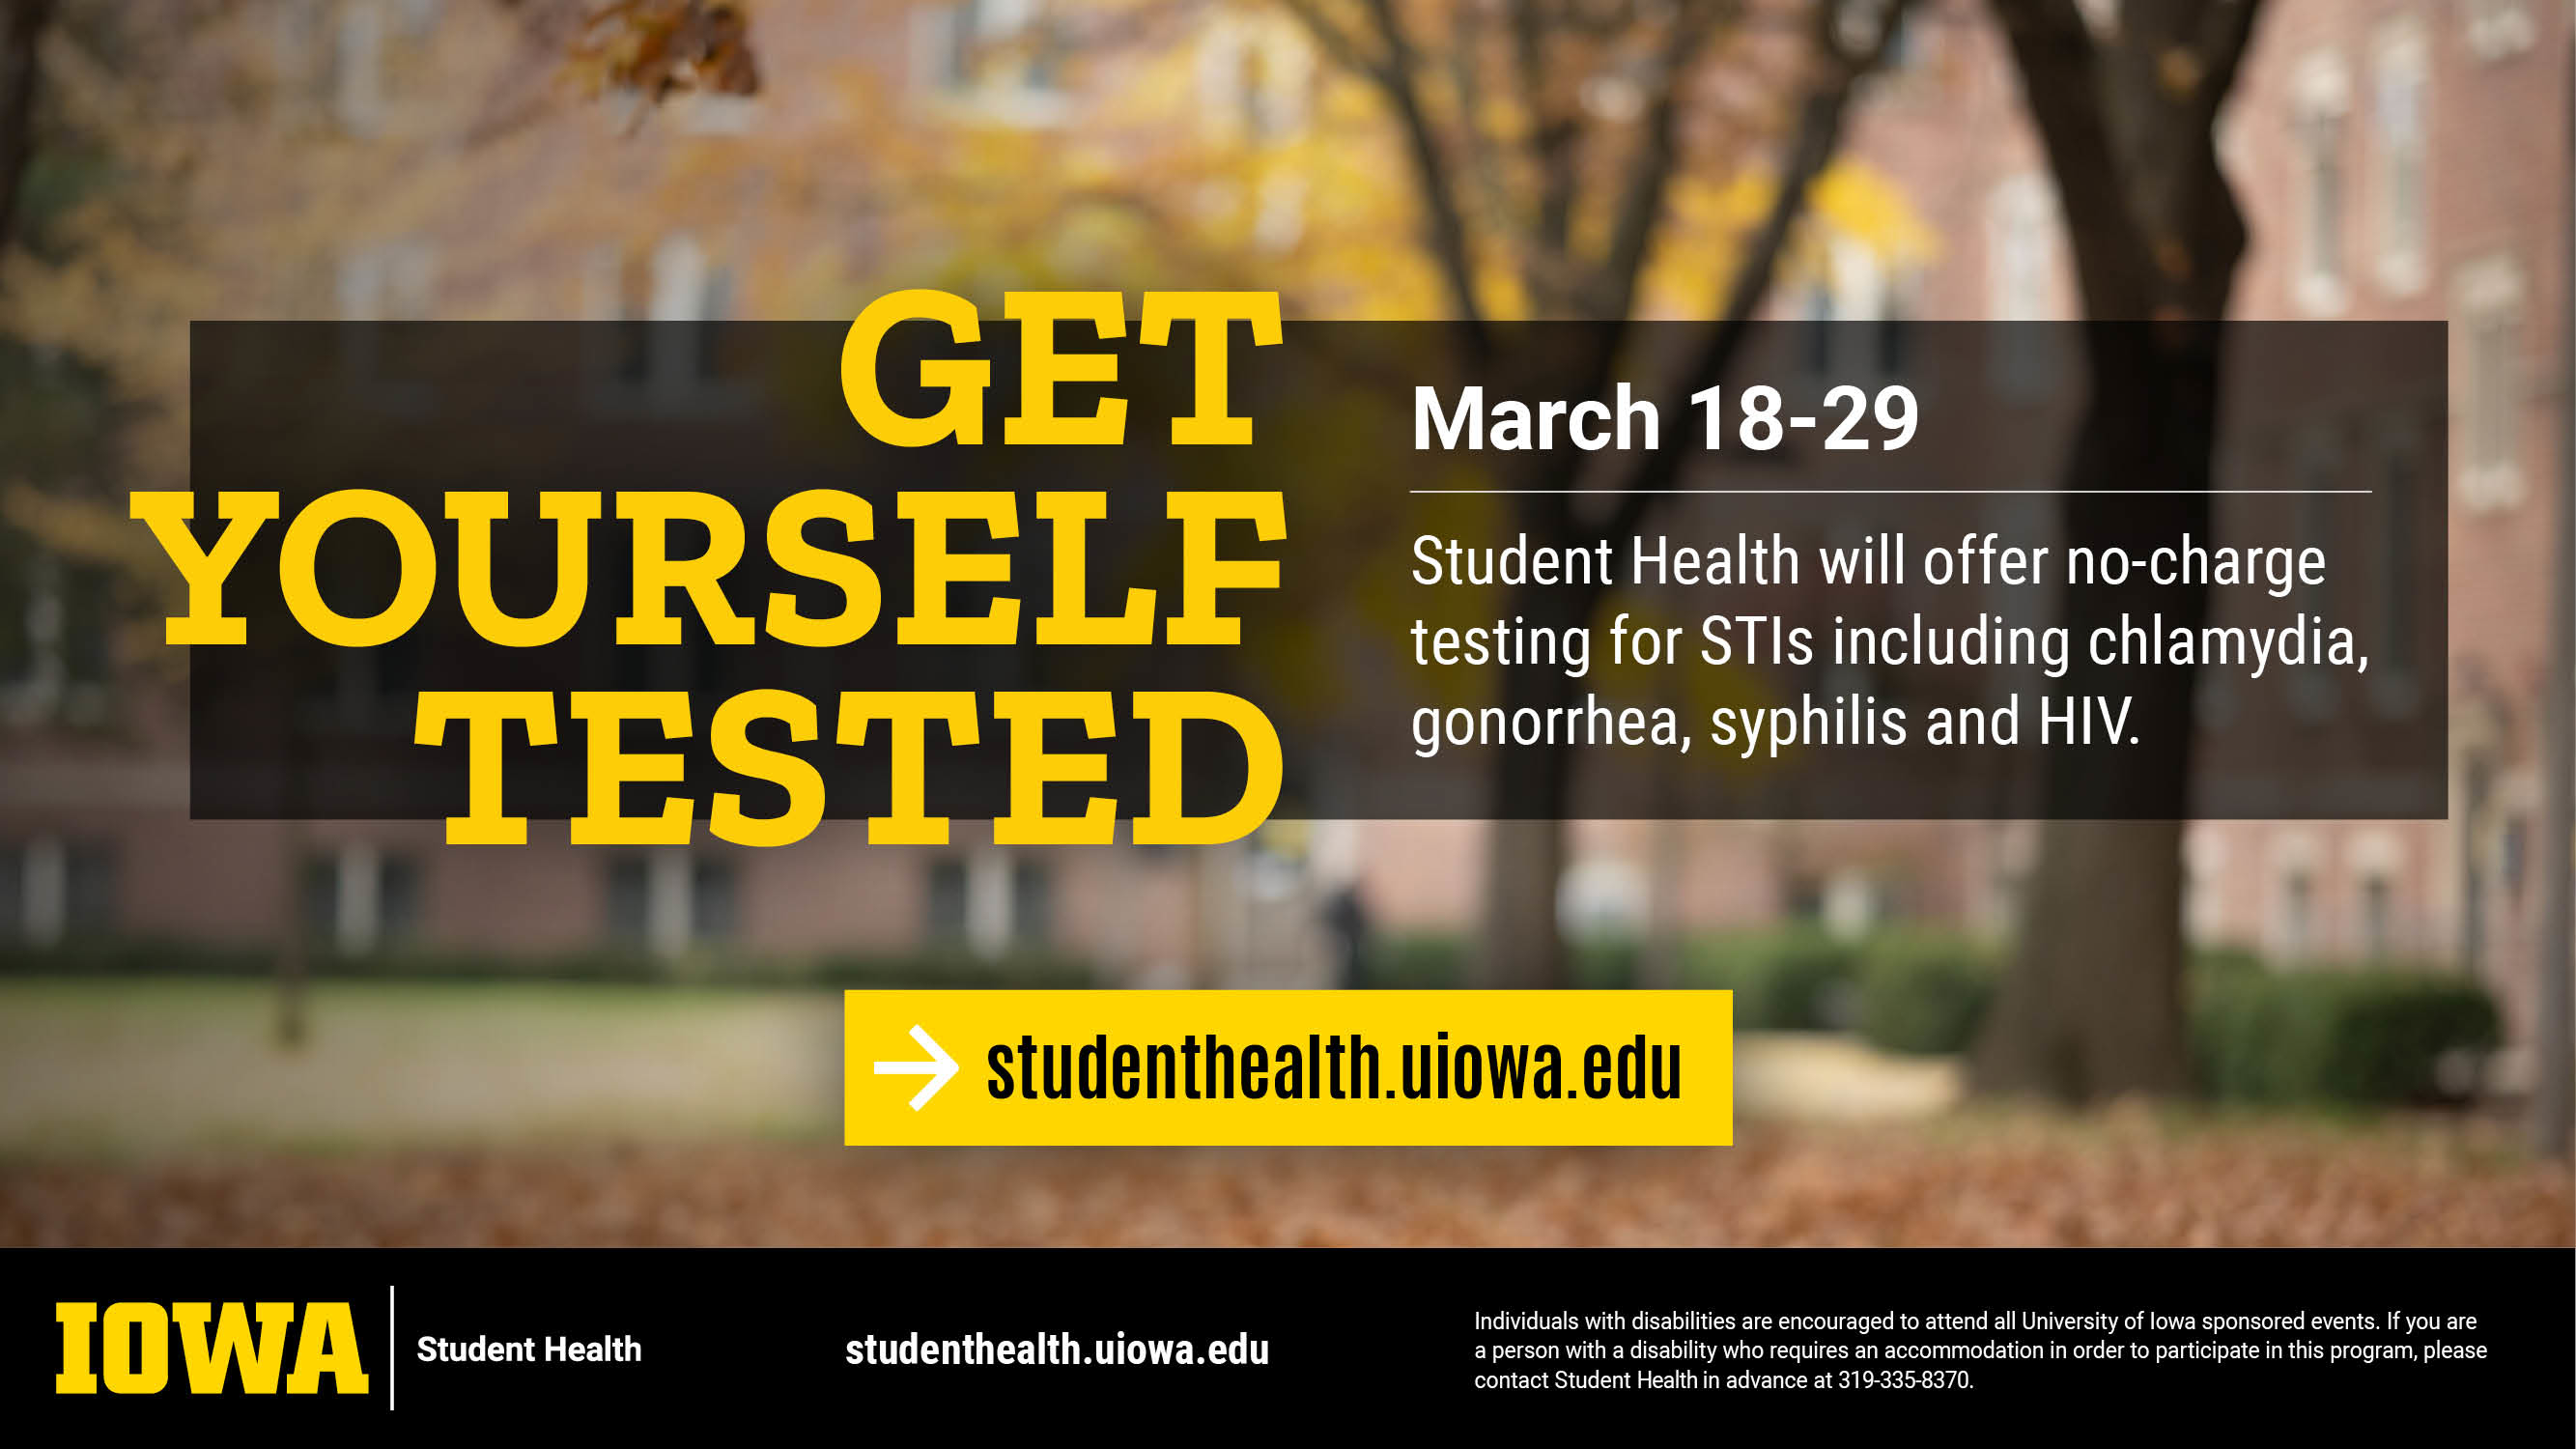 Student Health will offer free STI testing from March 18-29.